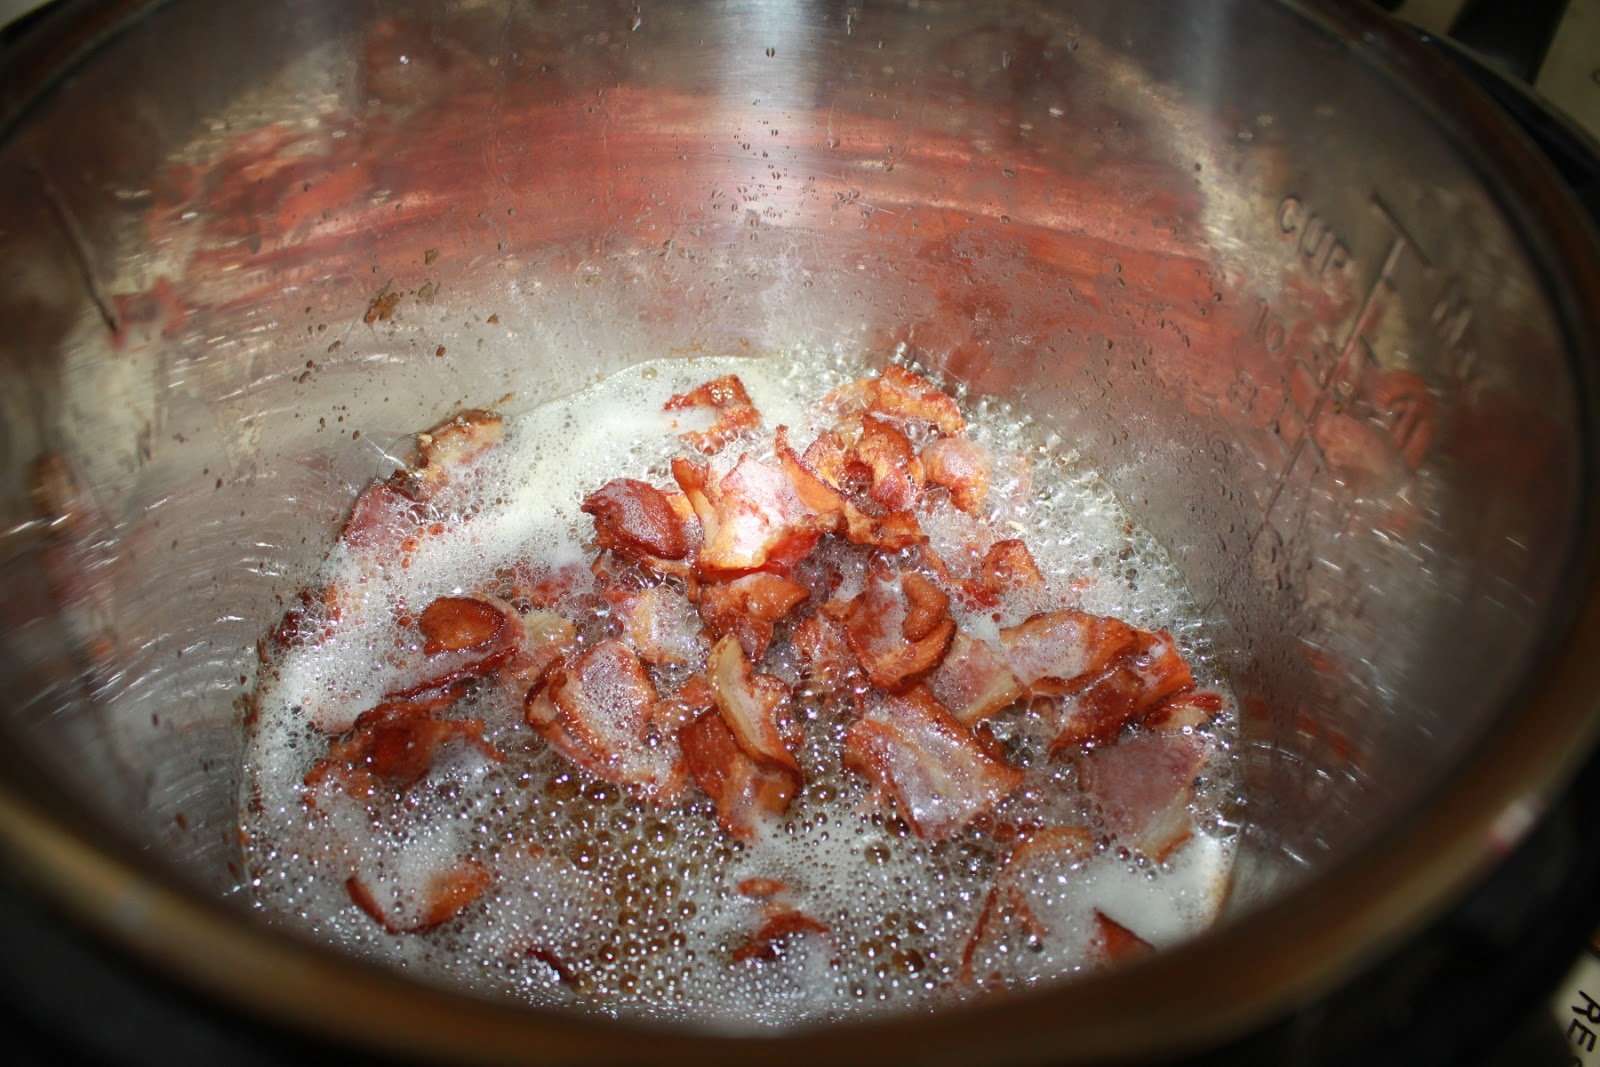 Reflections of katlupe: Cooking Bacon In The Instant Pot